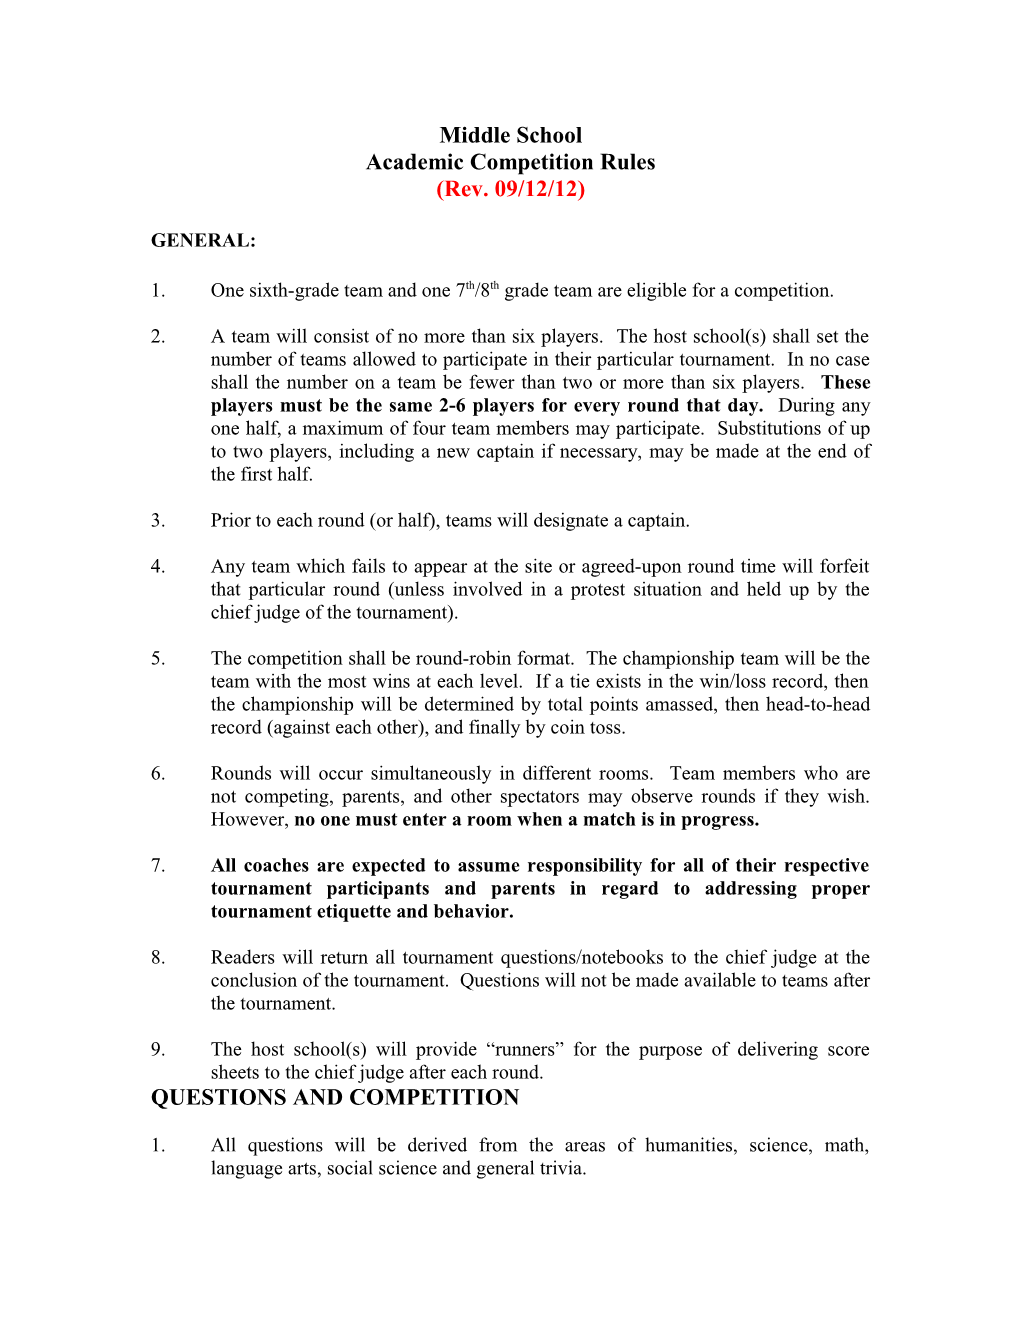 Academic Competition Rules